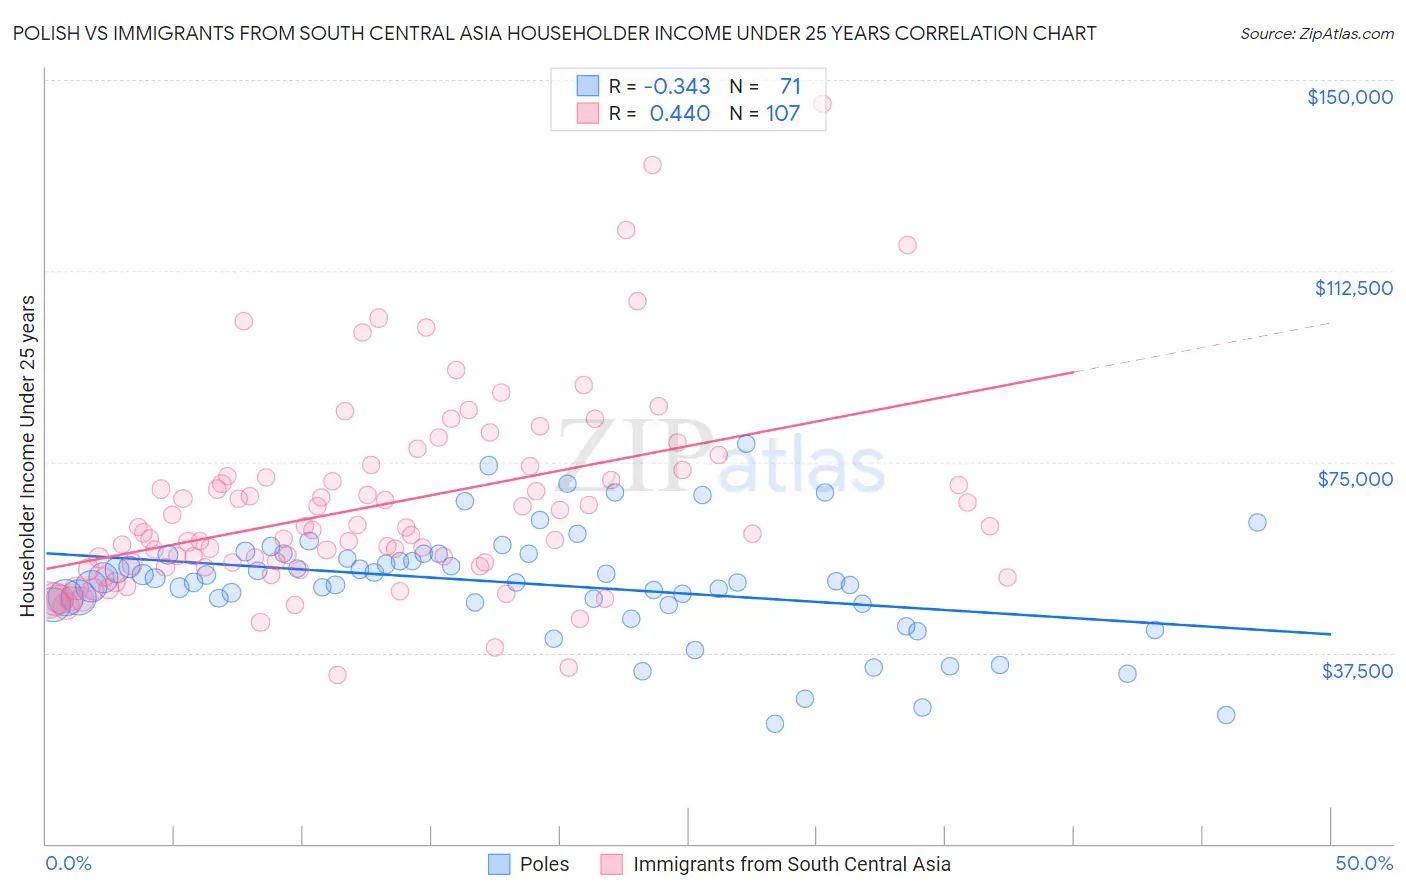 Polish vs Immigrants from South Central Asia Householder Income Under 25 years